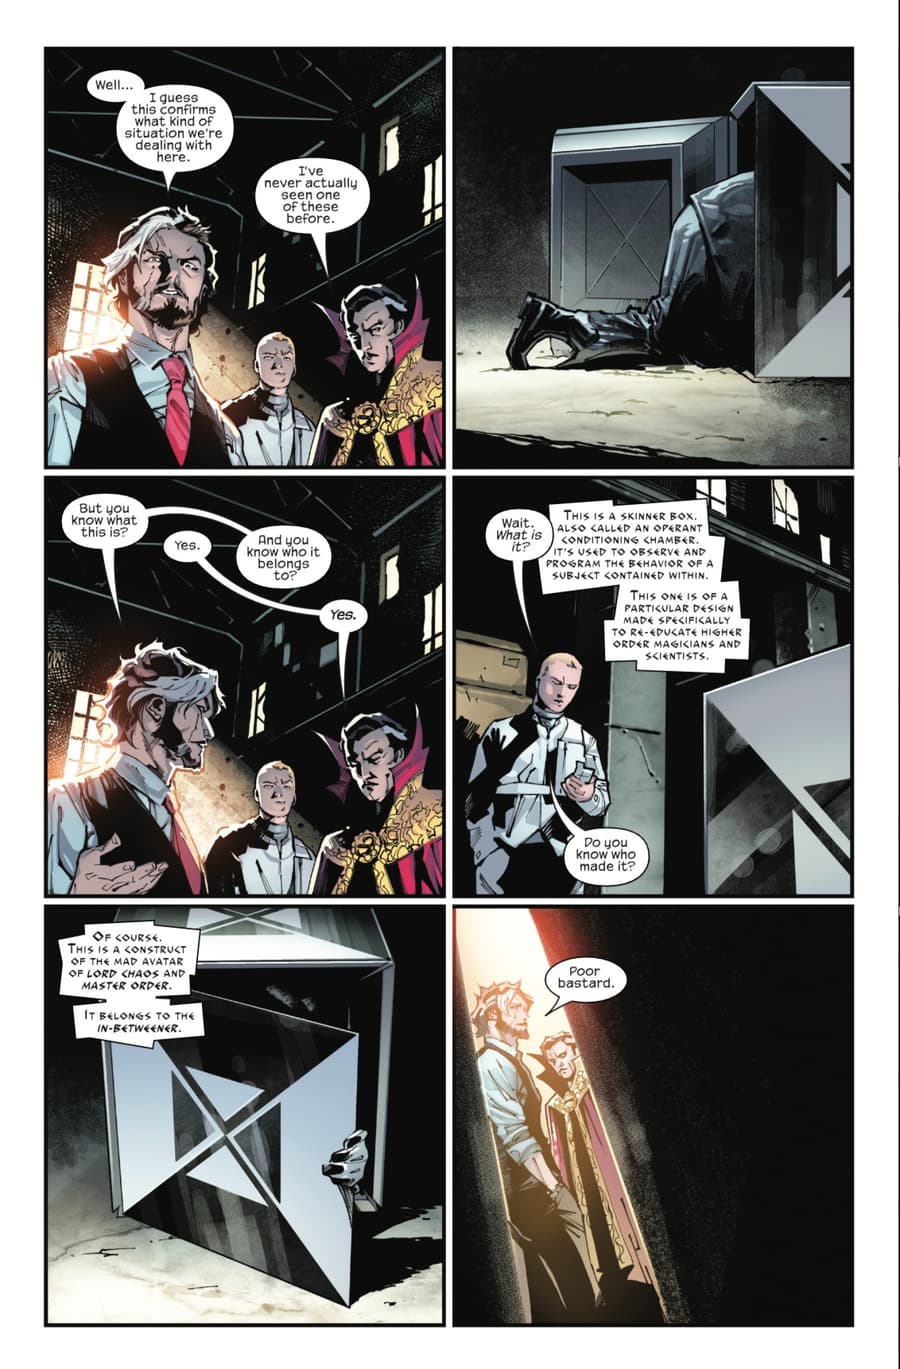 G.O.D.S. (2023) #2 page by Jonathan Hickman and Valerio Schiti